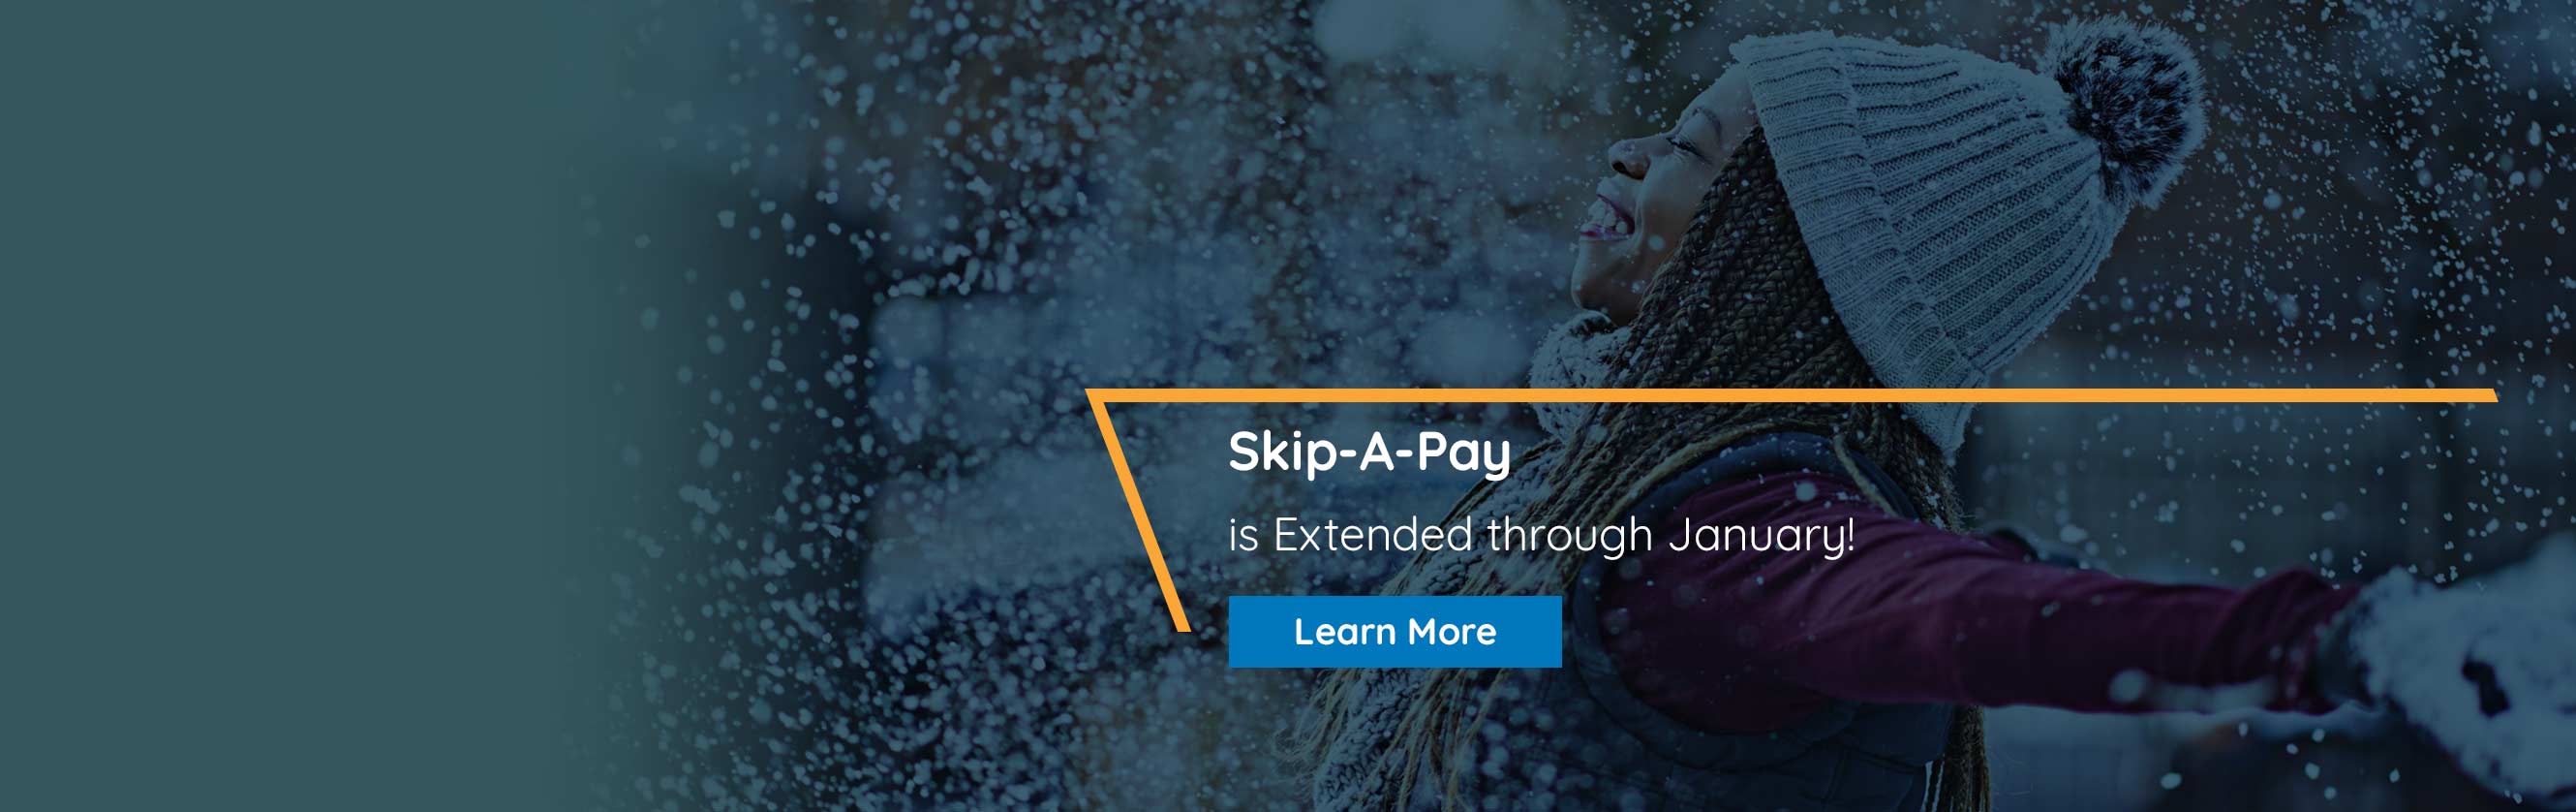 Skip-A-Pay is Extended through January | Learn More